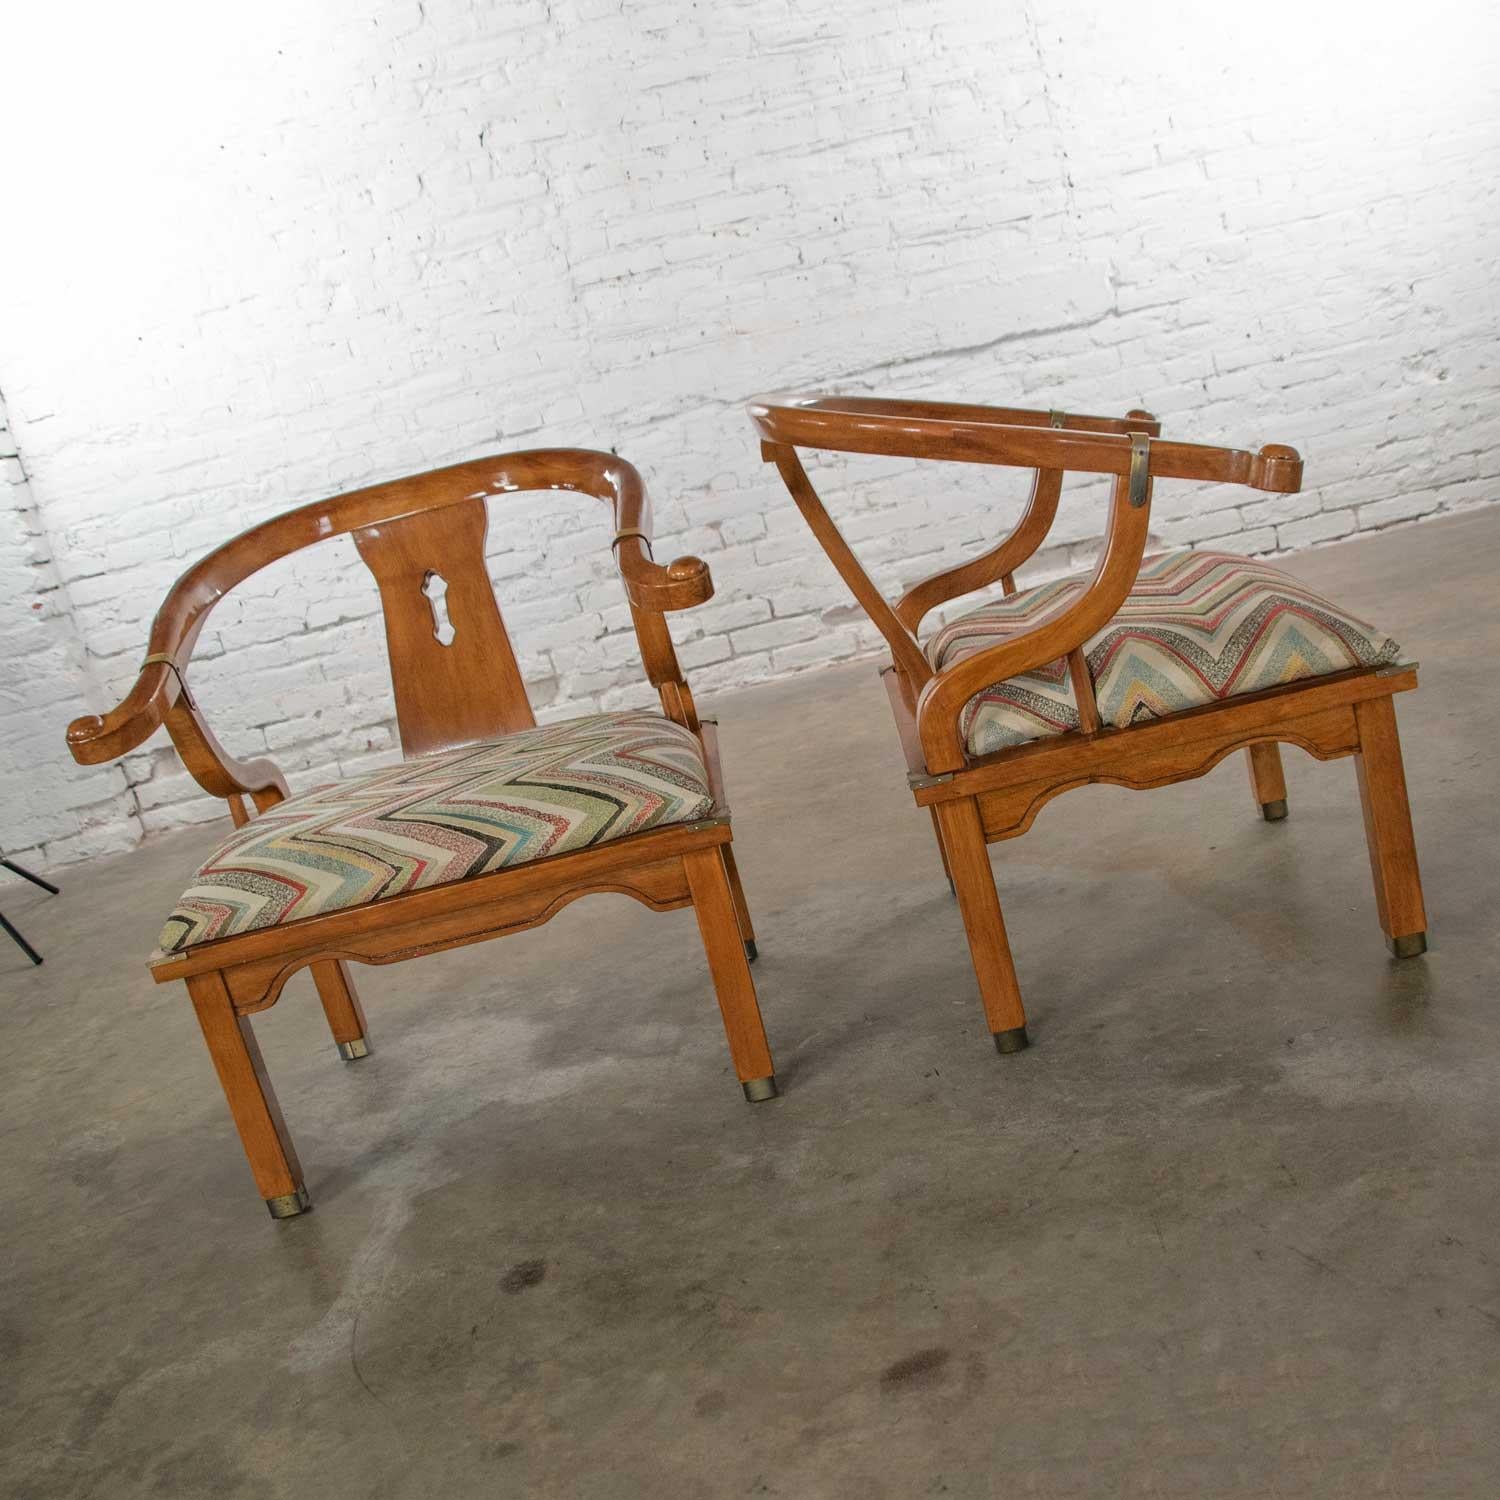 Marvelous pair of chinoiserie Ming style yoke back lounge chairs with a little Hollywood Regency pizzazz attributed to Schnadig Furniture International. Comprised of gorgeous wood, brass, and flame stitch fabric. Beautiful vintage condition with